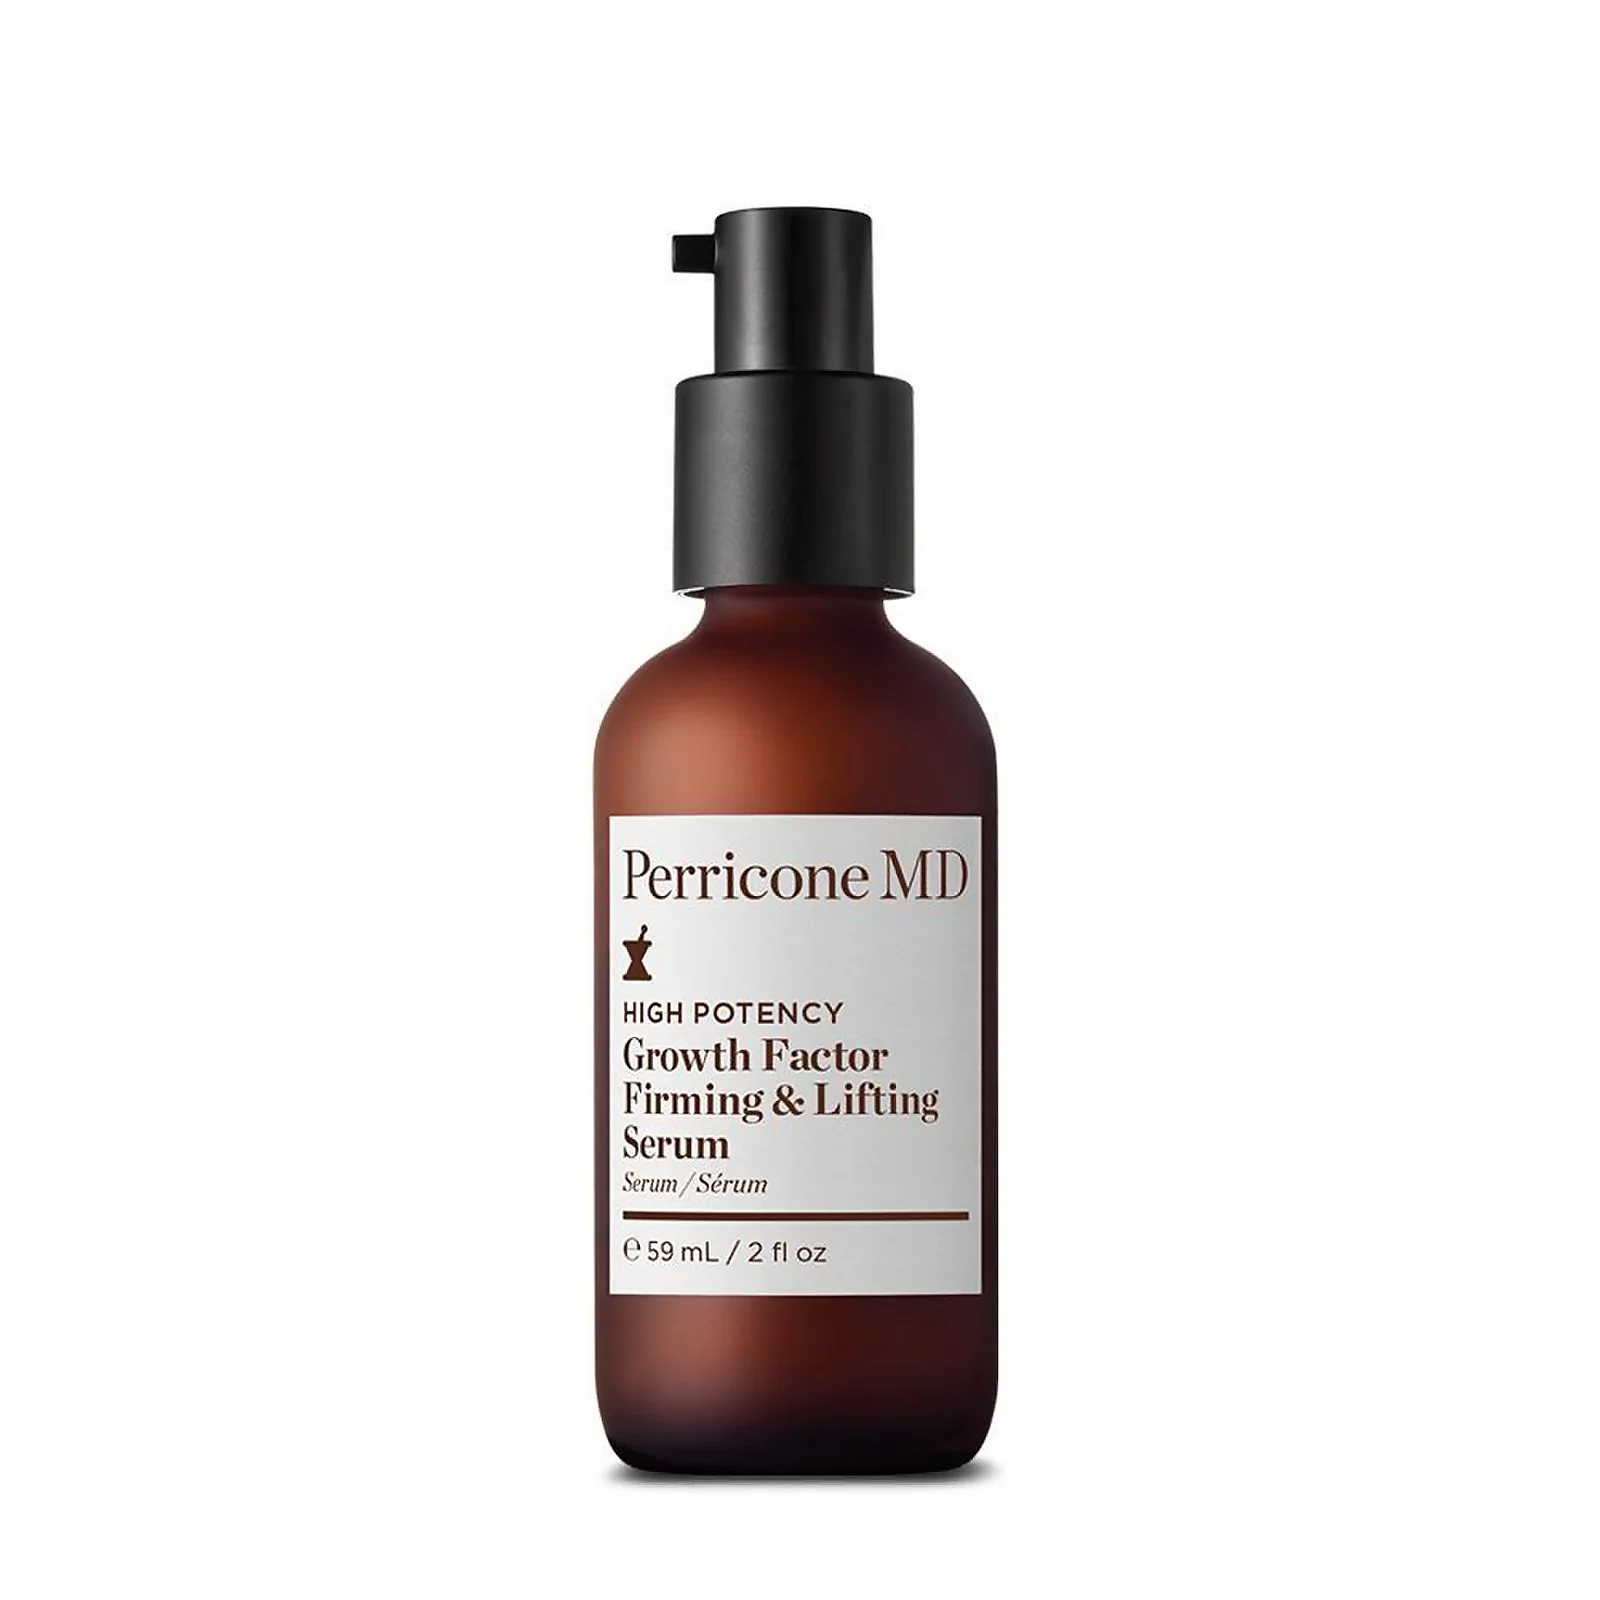 Perricone MD High Potency Growth Factor Firming and Lifting Serum 59ml Image 1